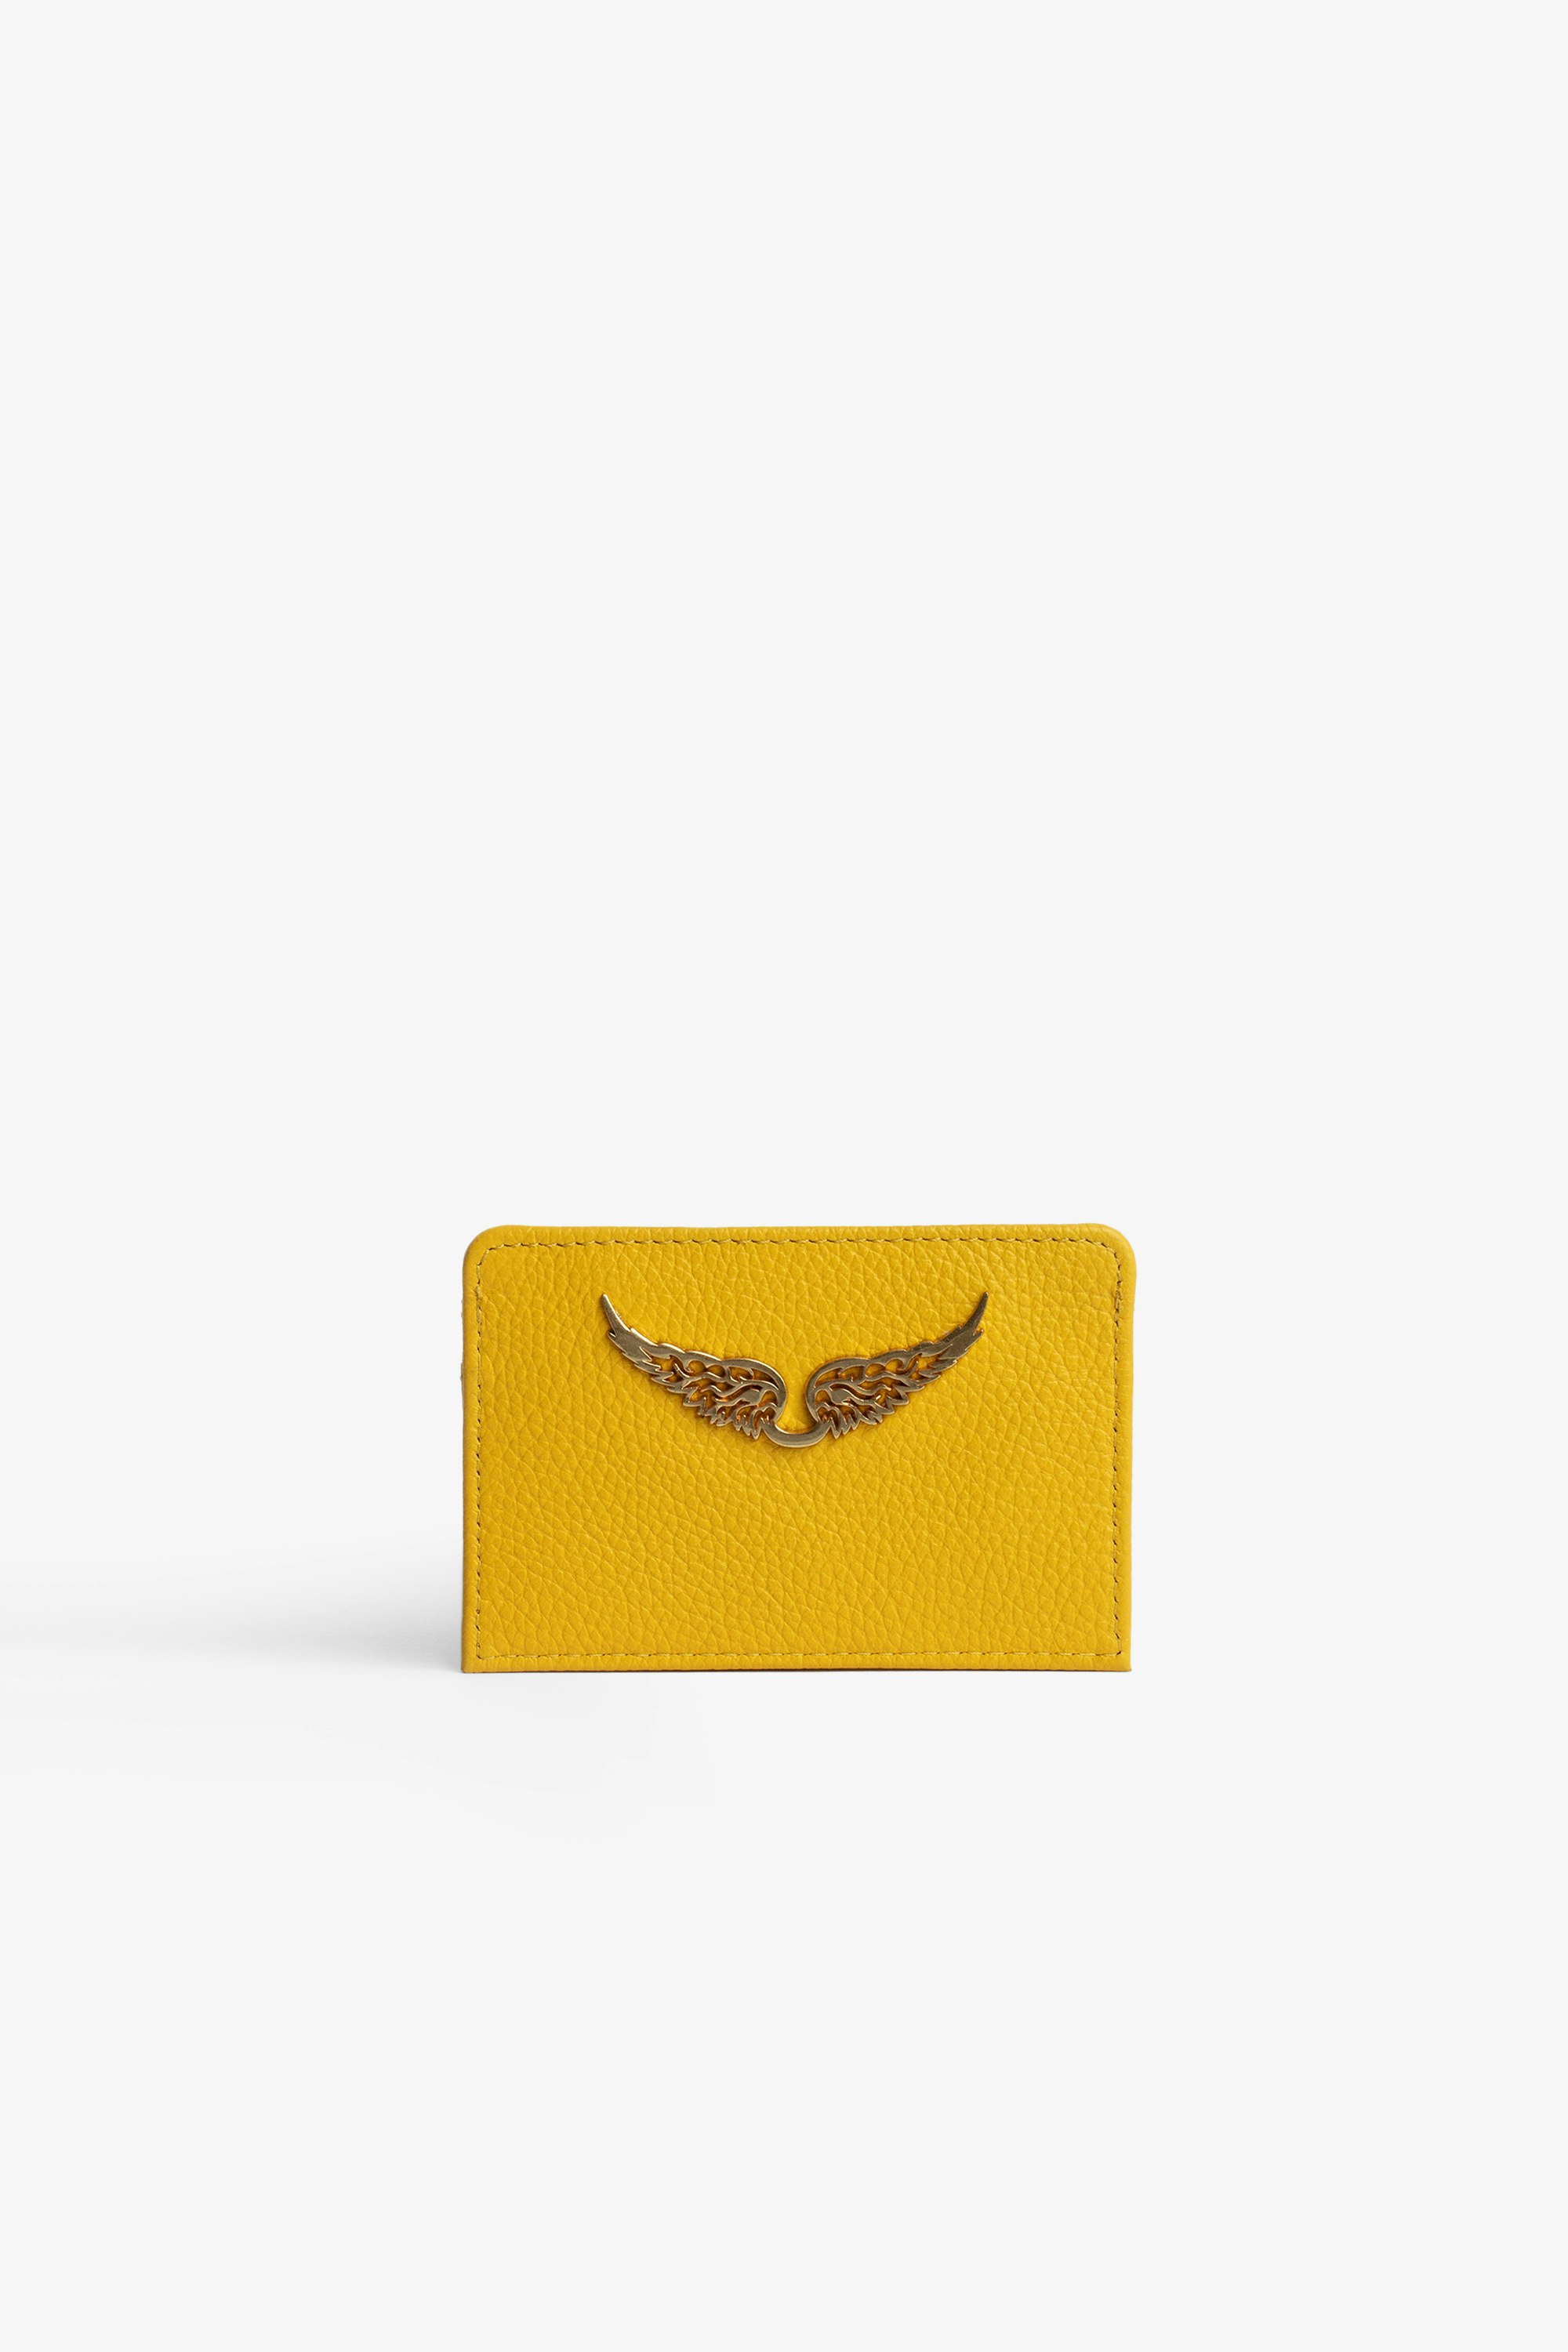 ZV Pass Card Case Women’s card holder in yellow grained leather